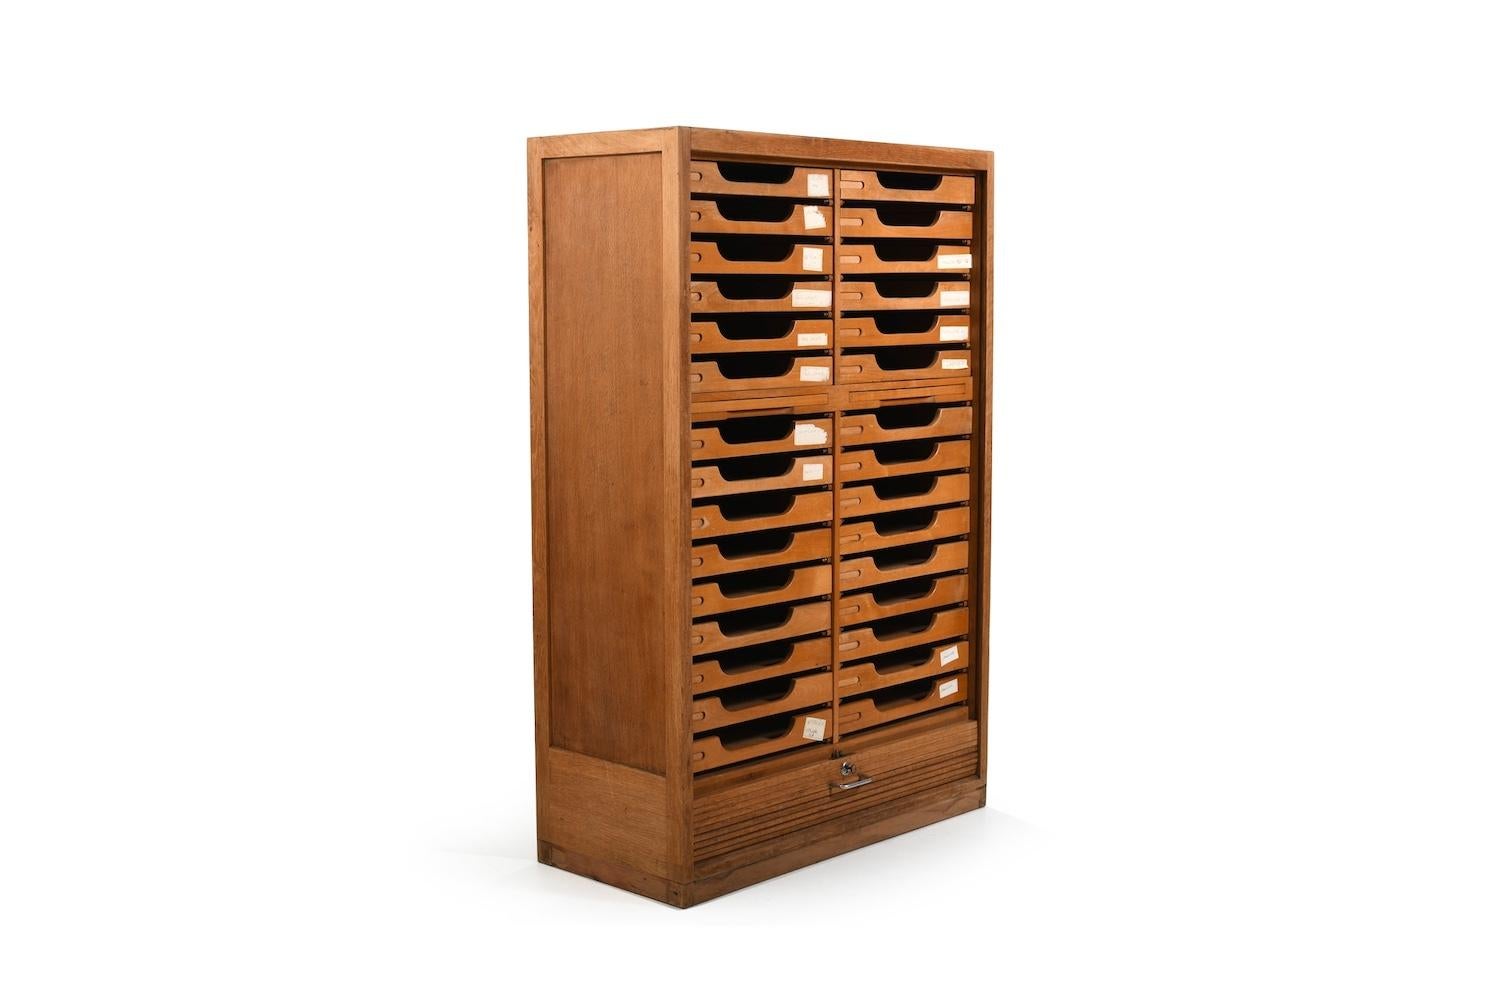 Hans J. Wegner tambour door cabinet with 30 drawers. Made in oak and drawers in birch wood. Prod. 1940s for the Aarhus city hall by Plan Møbler Denmark.